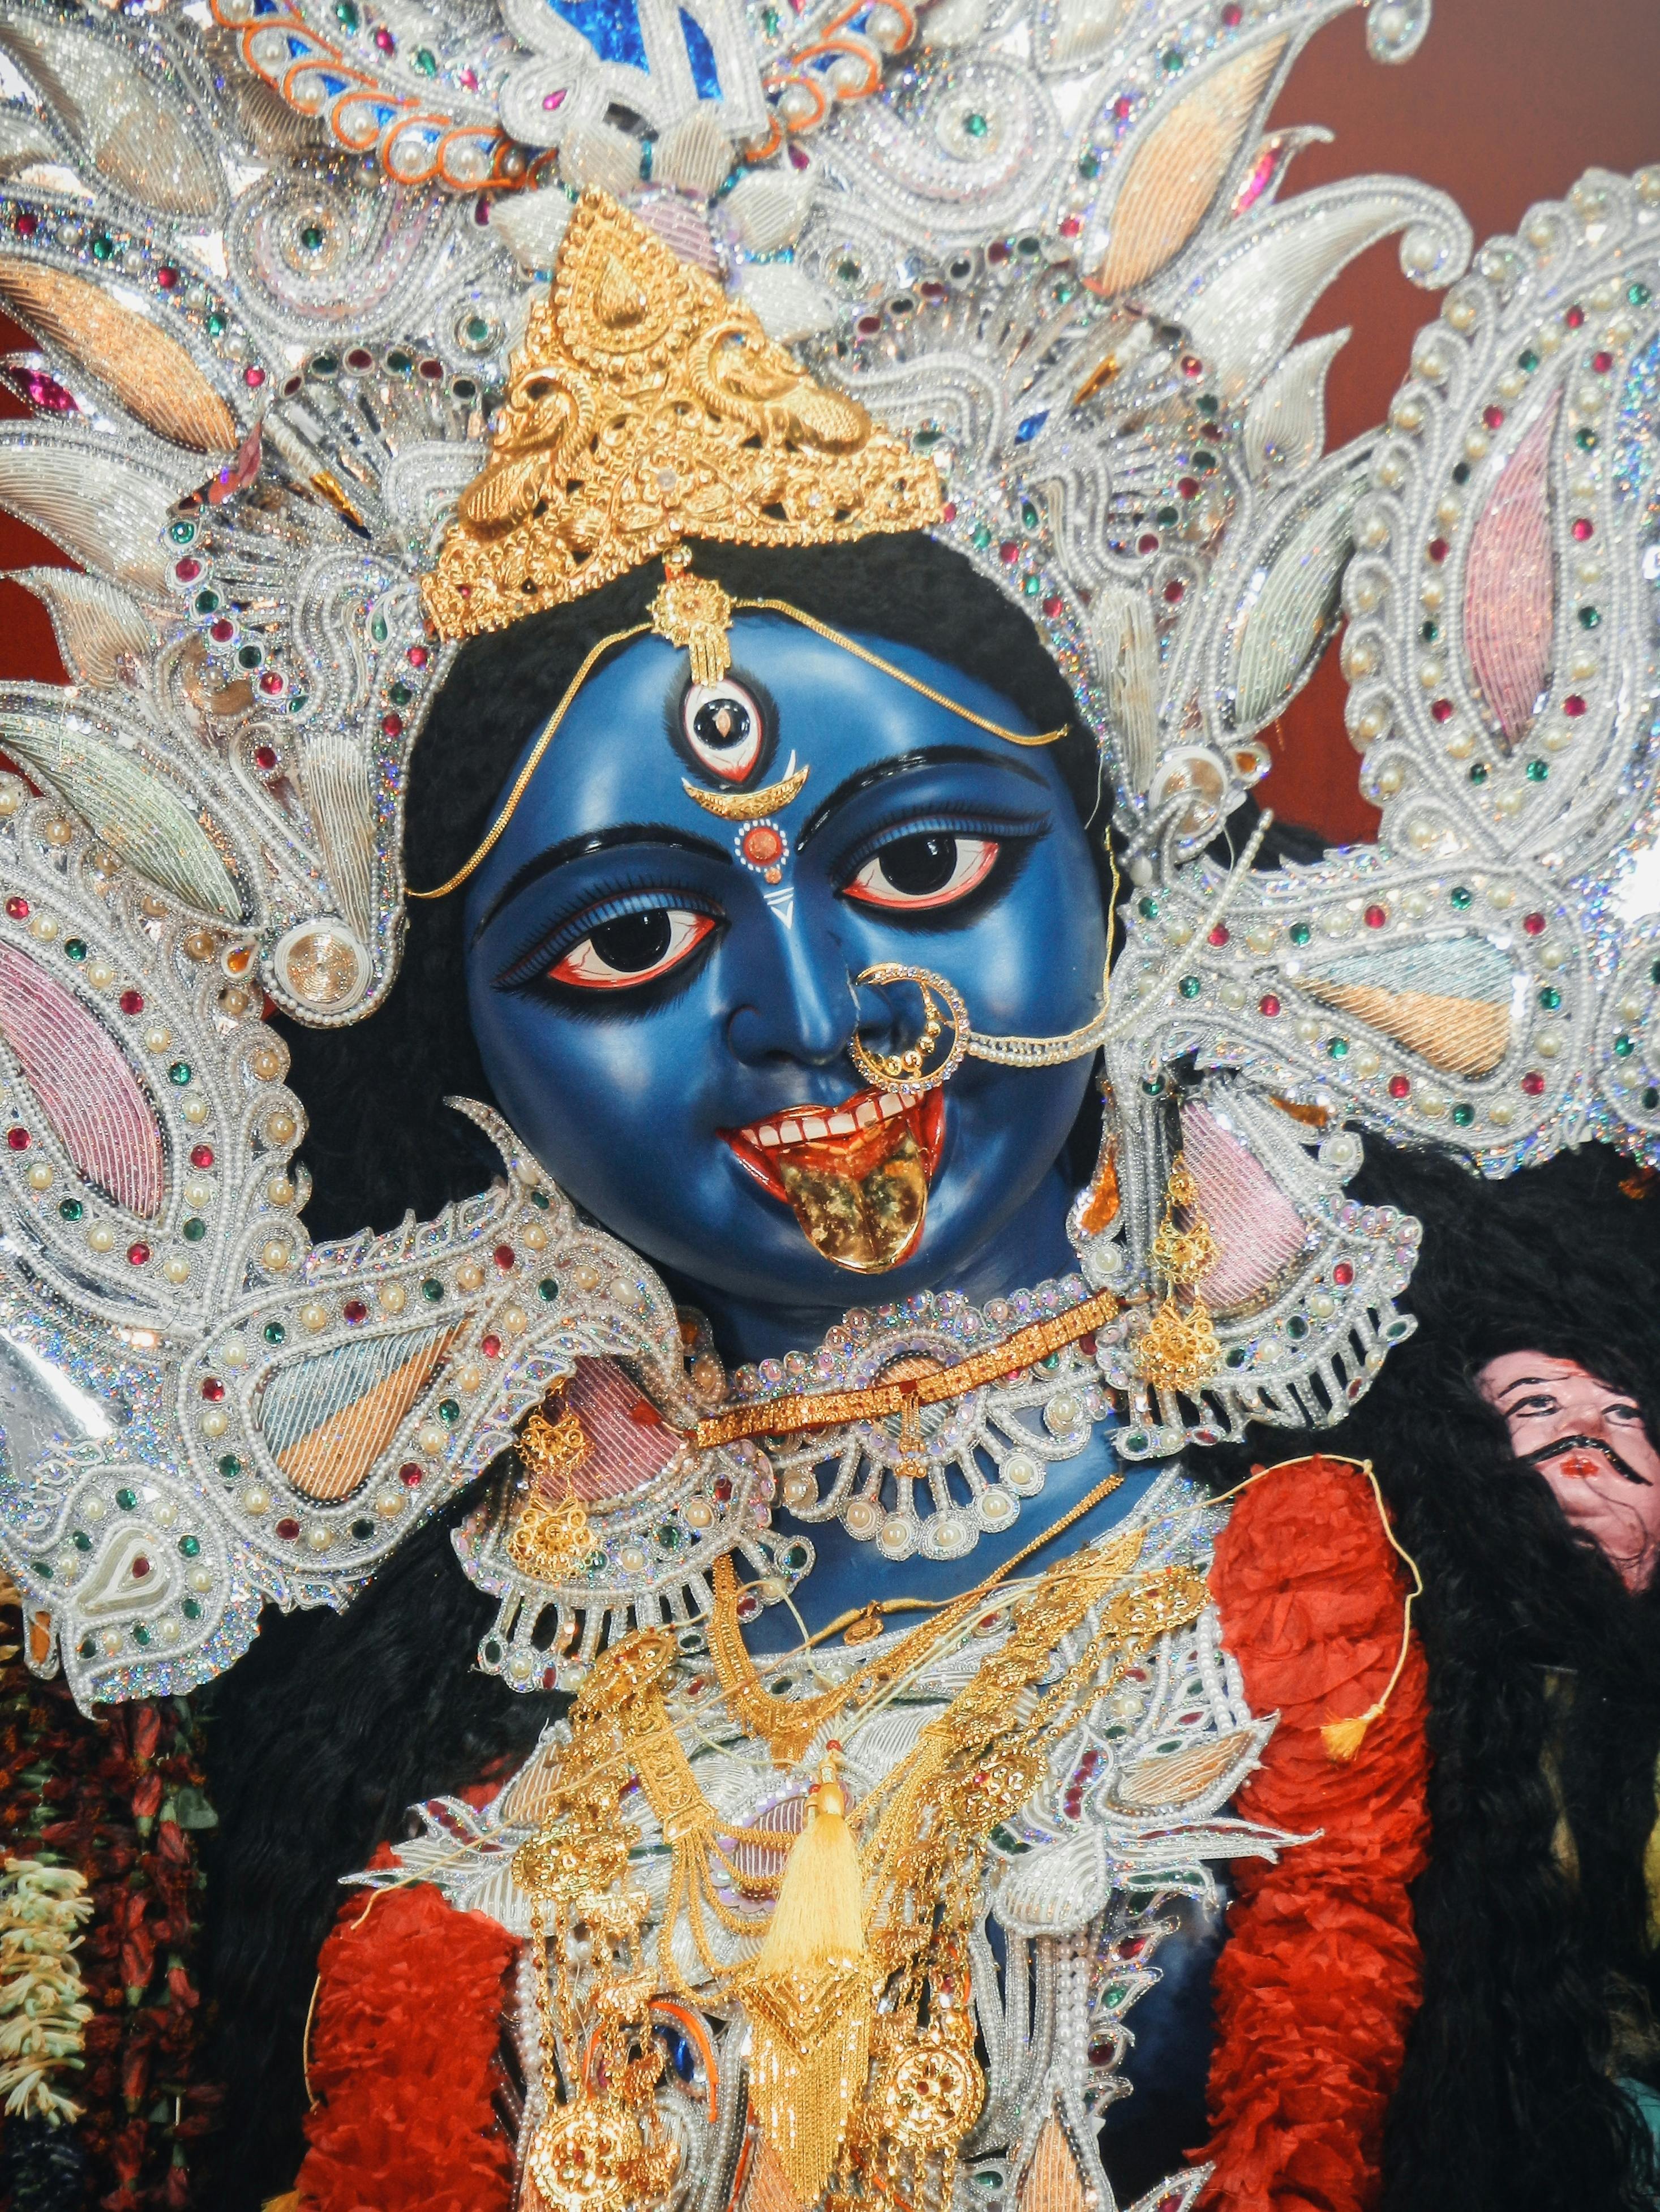 Kali Puja Photos, Download The BEST Free Kali Puja Stock Photos & HD Images